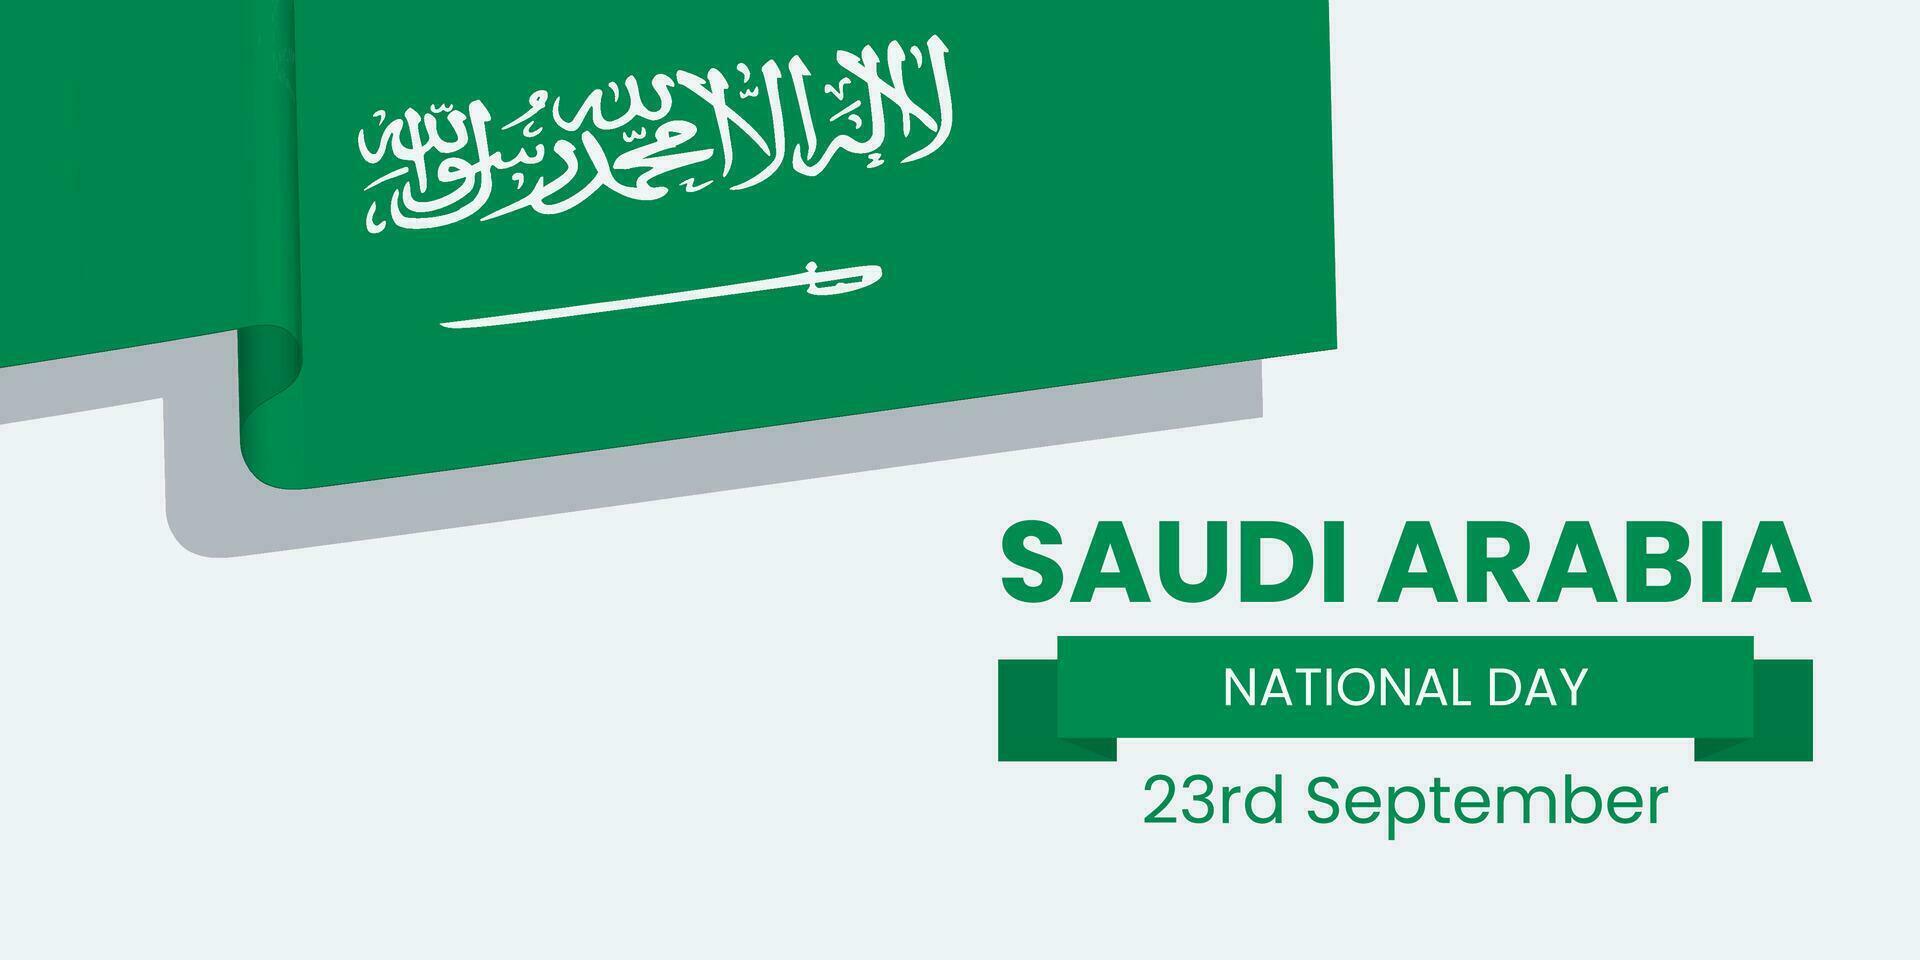 Saudi Arabia National Day Banner or Post Template with Flags. Happy Independence Day Saudi Arabia 23rd September. vector